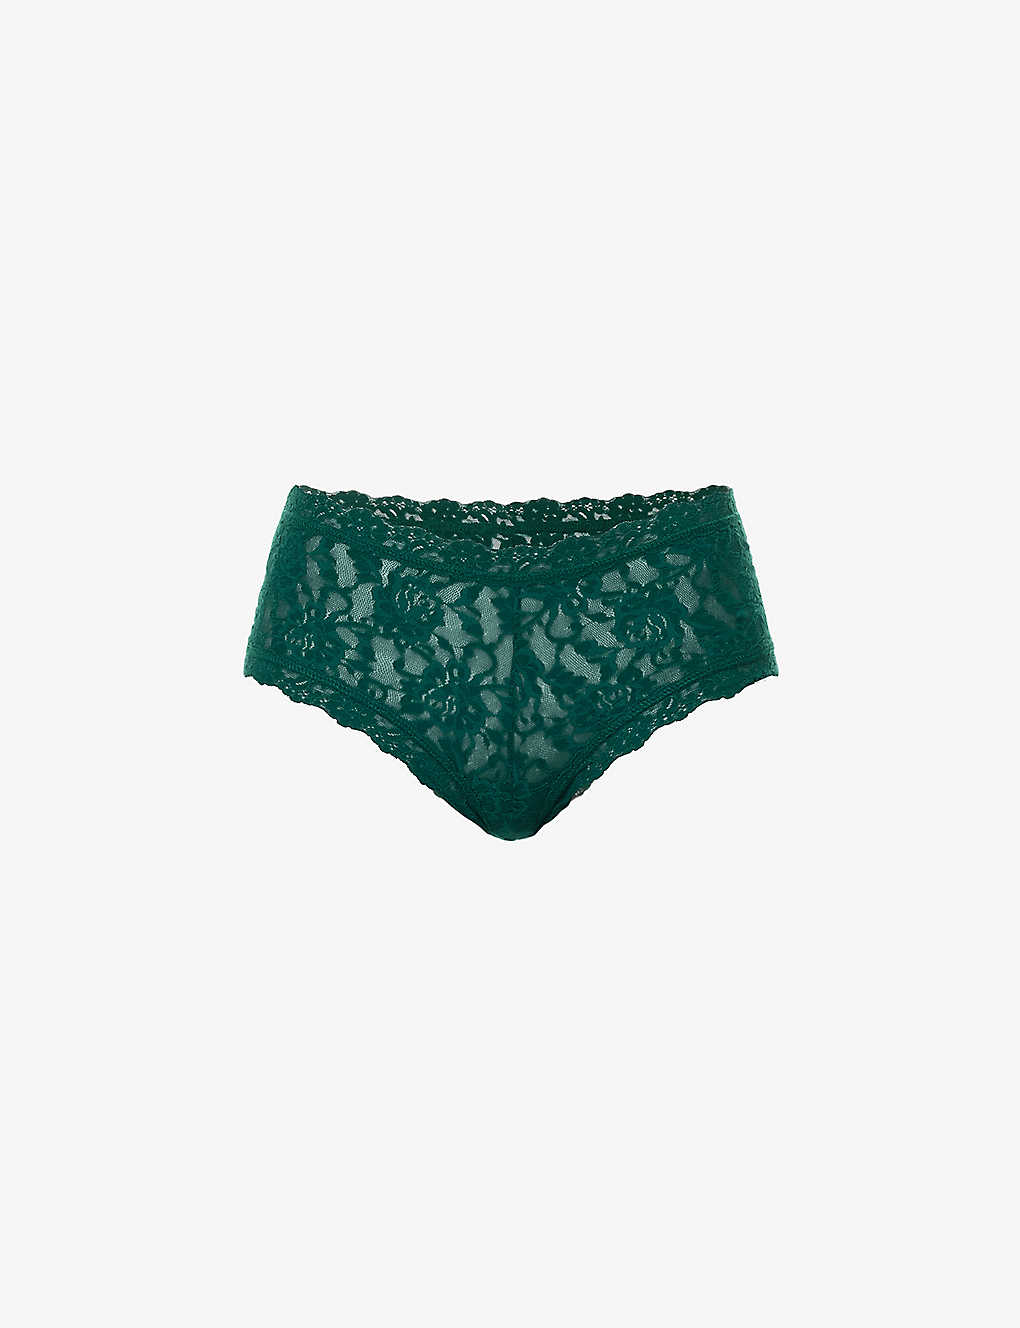 HANKY PANKY HANKY PANKY WOMEN'S GREEN QUEEN SIGNATURE MID-RISE LACE BRIEFS,63976329